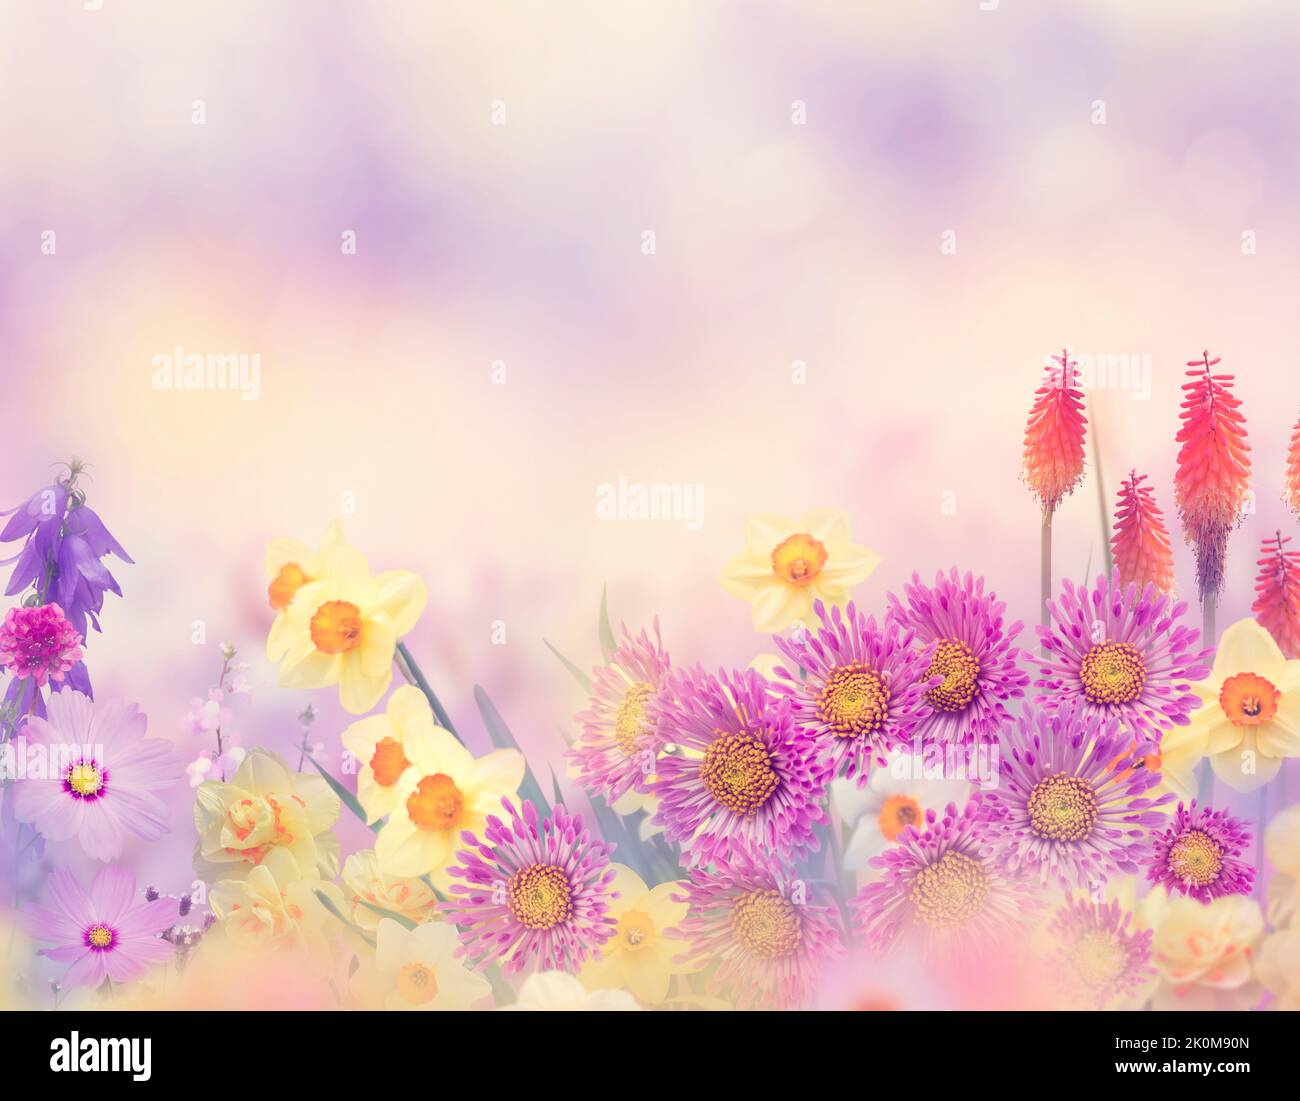 Variety of colorful flowers in the garden Stock Photo